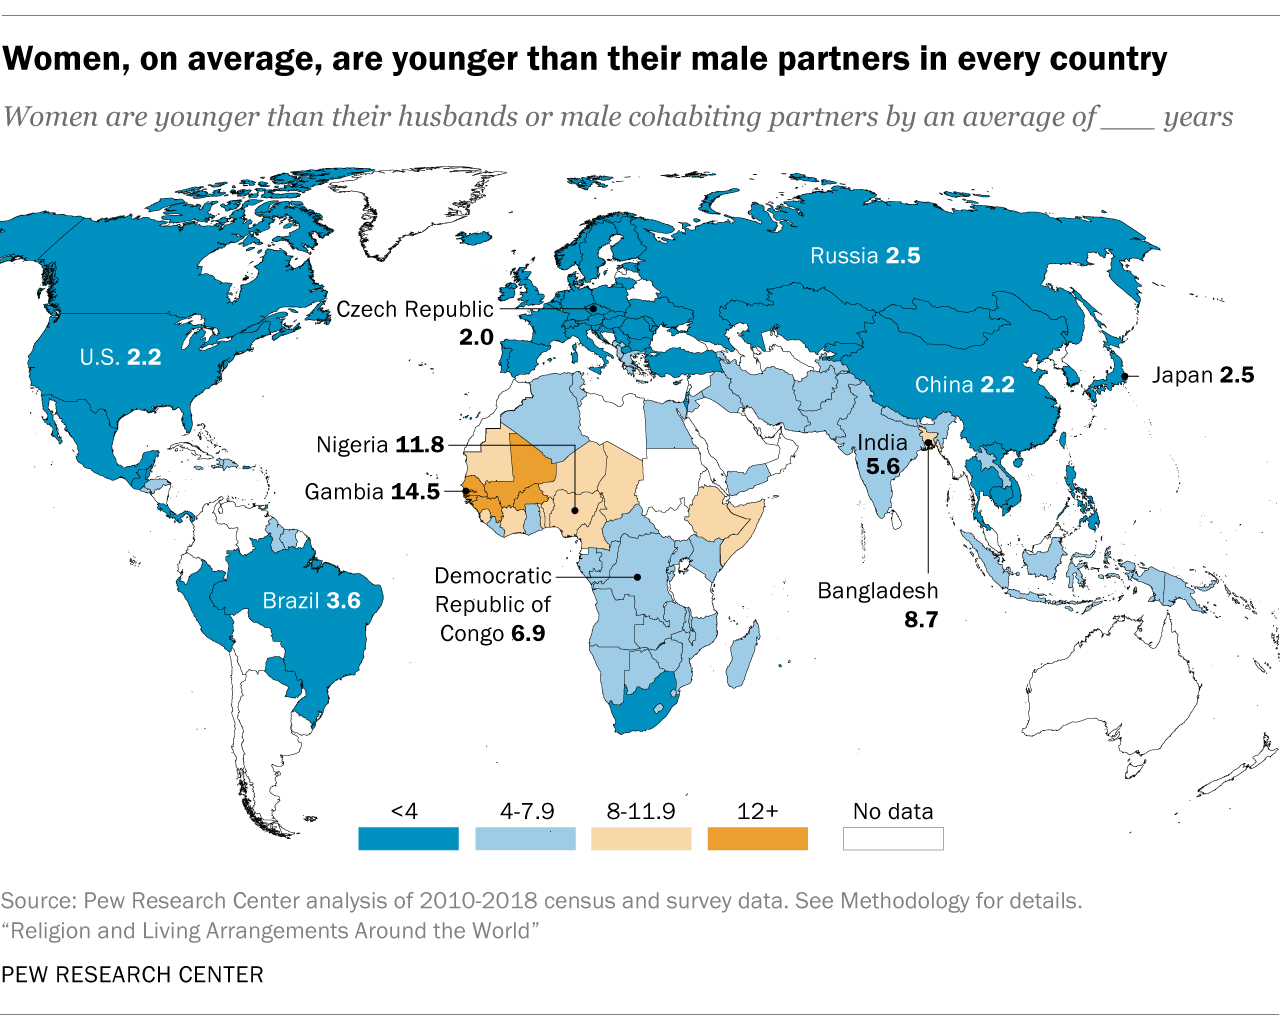 Women, on average, are younger than their male partners in every country